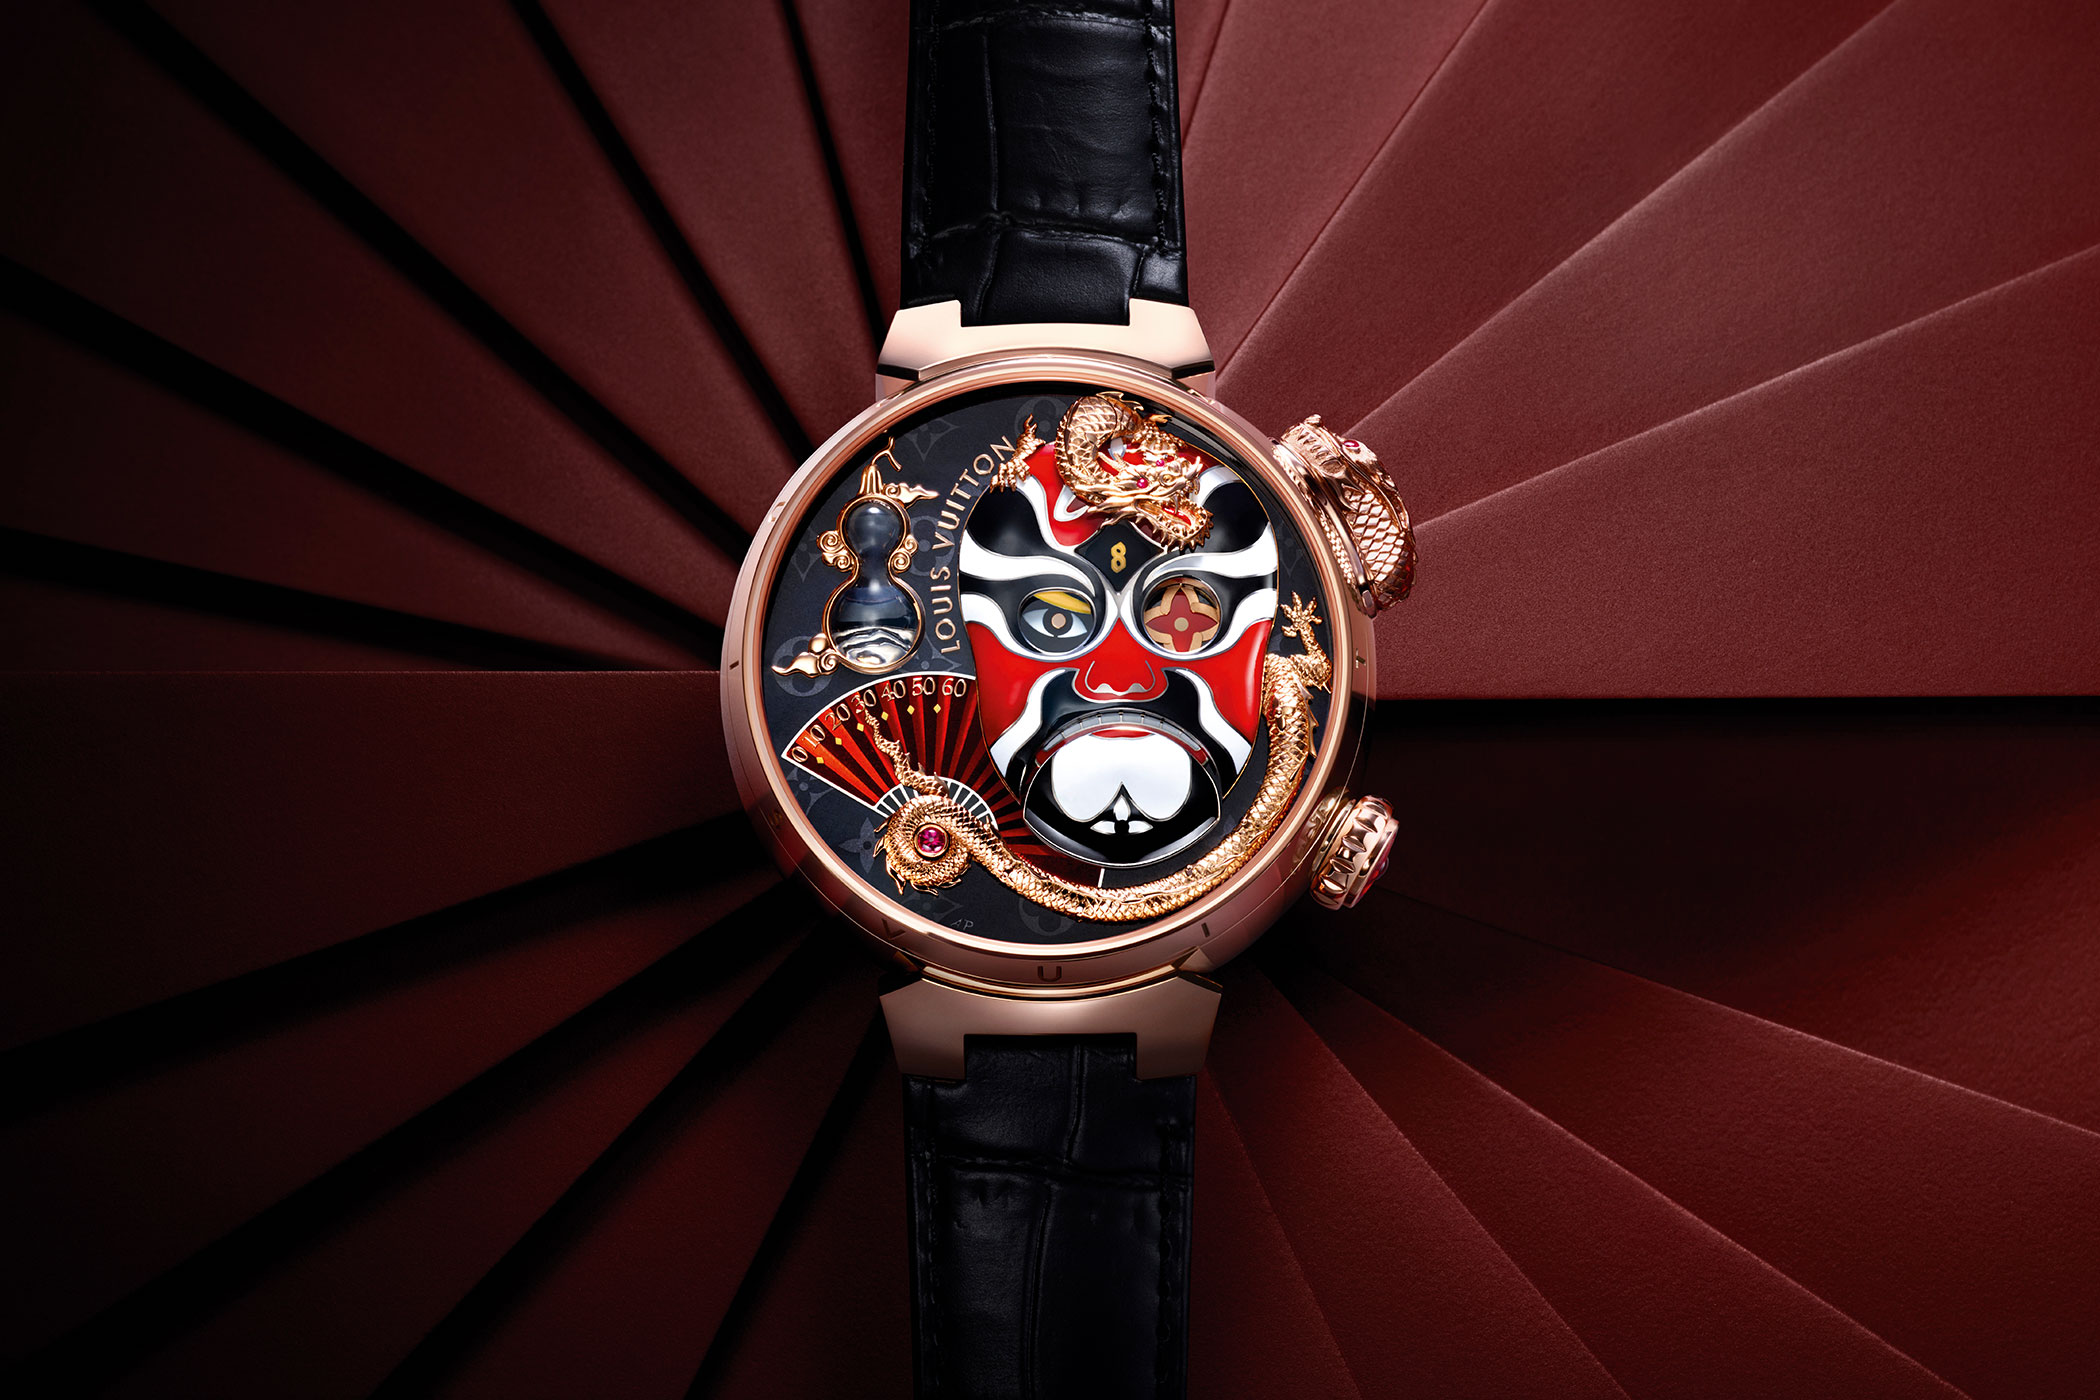 Louis Vuitton's Tambour Watch Turns 20 With a Limited Edition